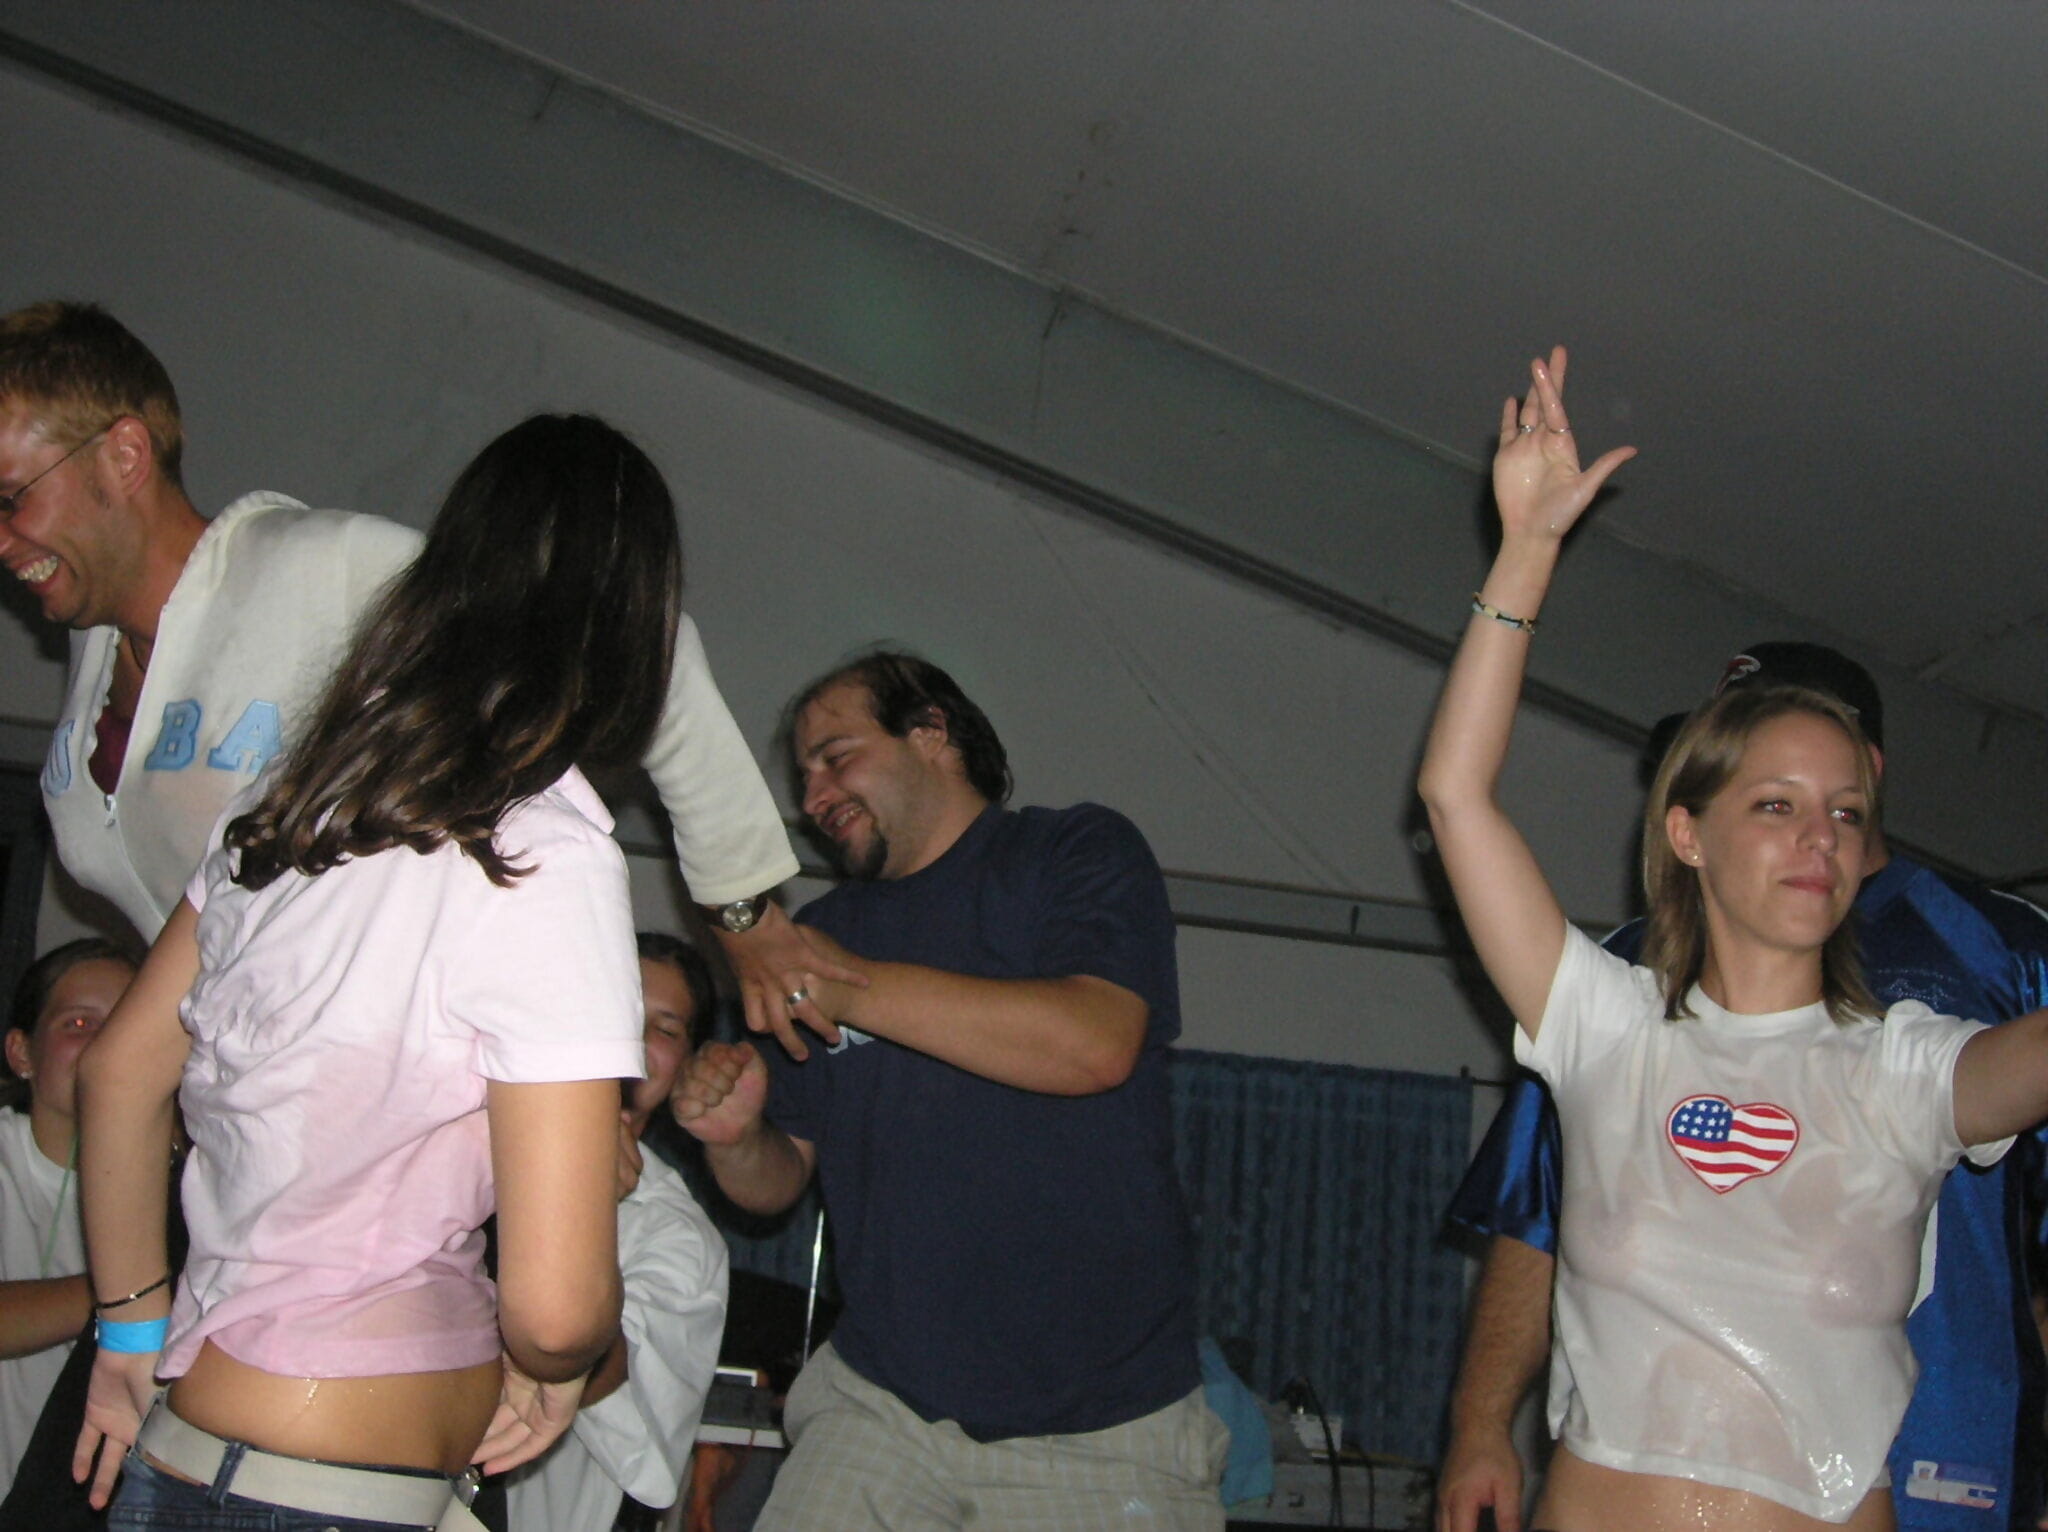 Real college party girlfriends fucking - part 4361 page 1